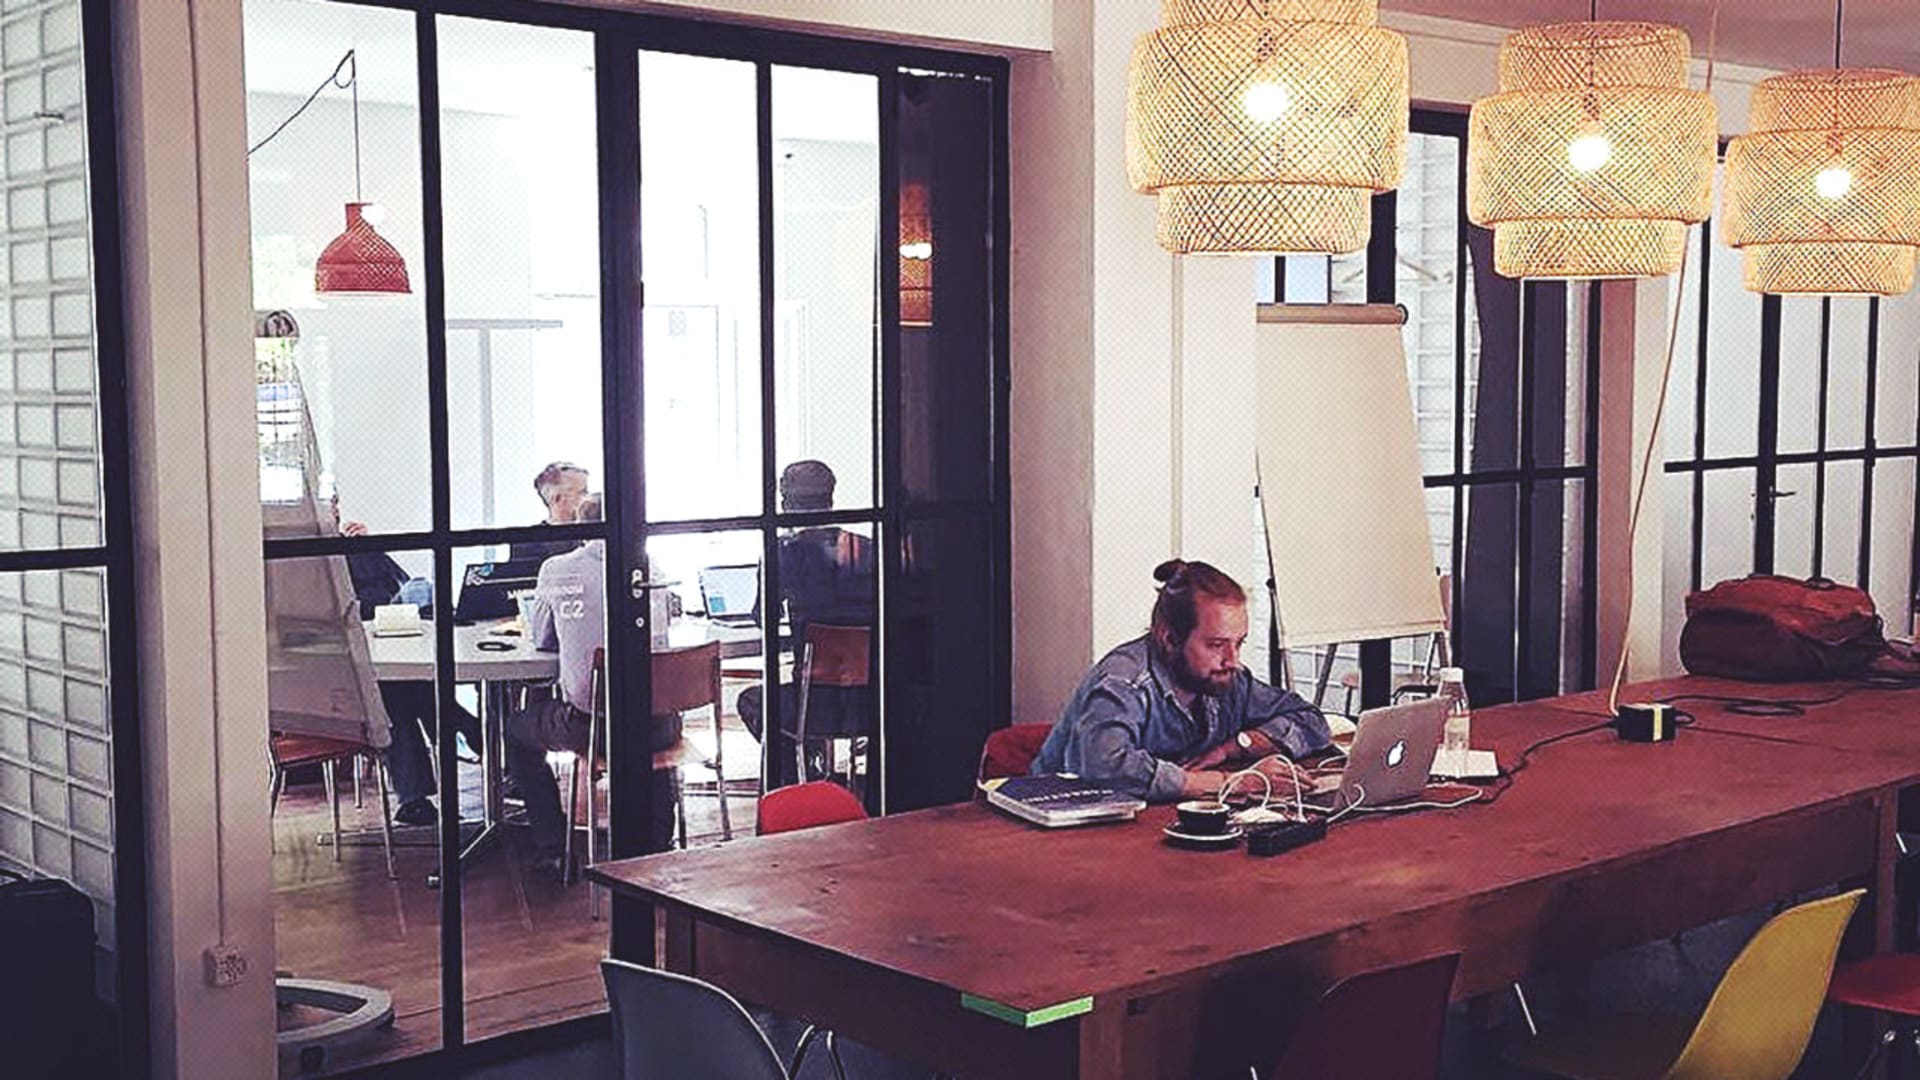 How These Remote Workers Convinced Their Bosses And Clients They Can Work From Anywhere